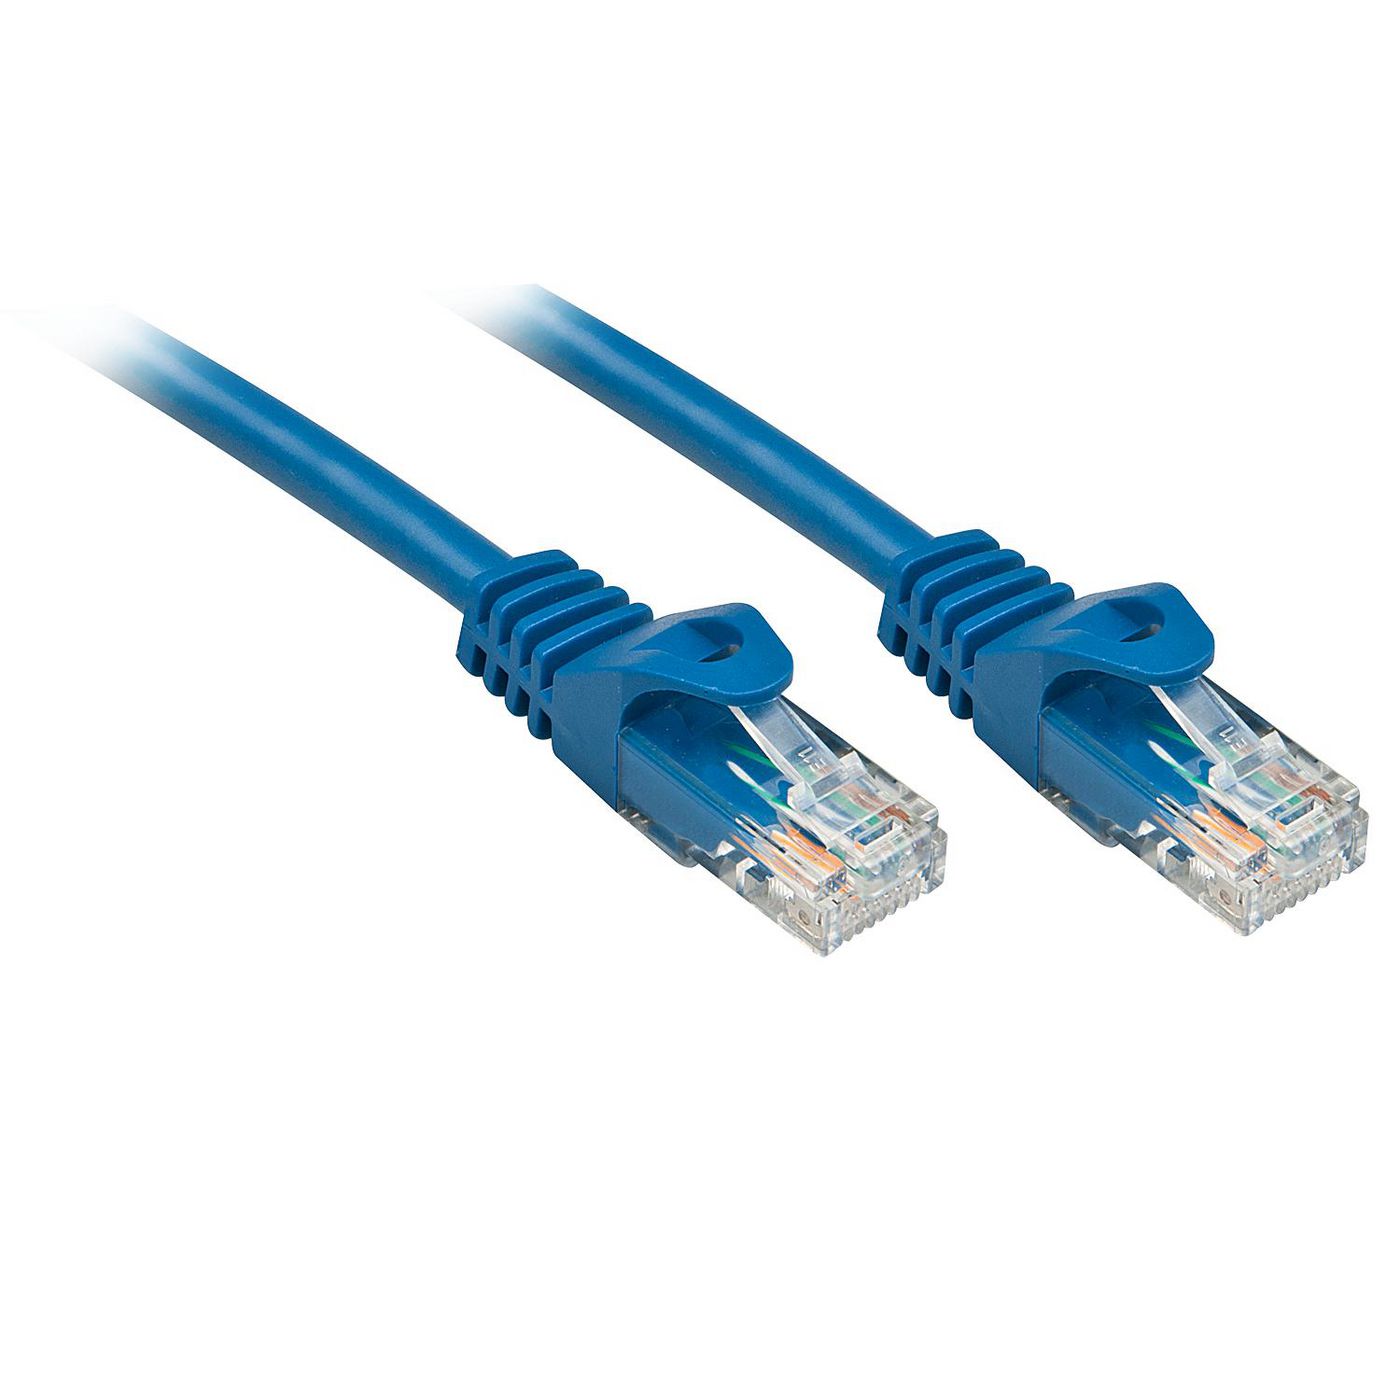 Lindy 48174 W128457556 3m Cat.6 UUTP Network Cable, 